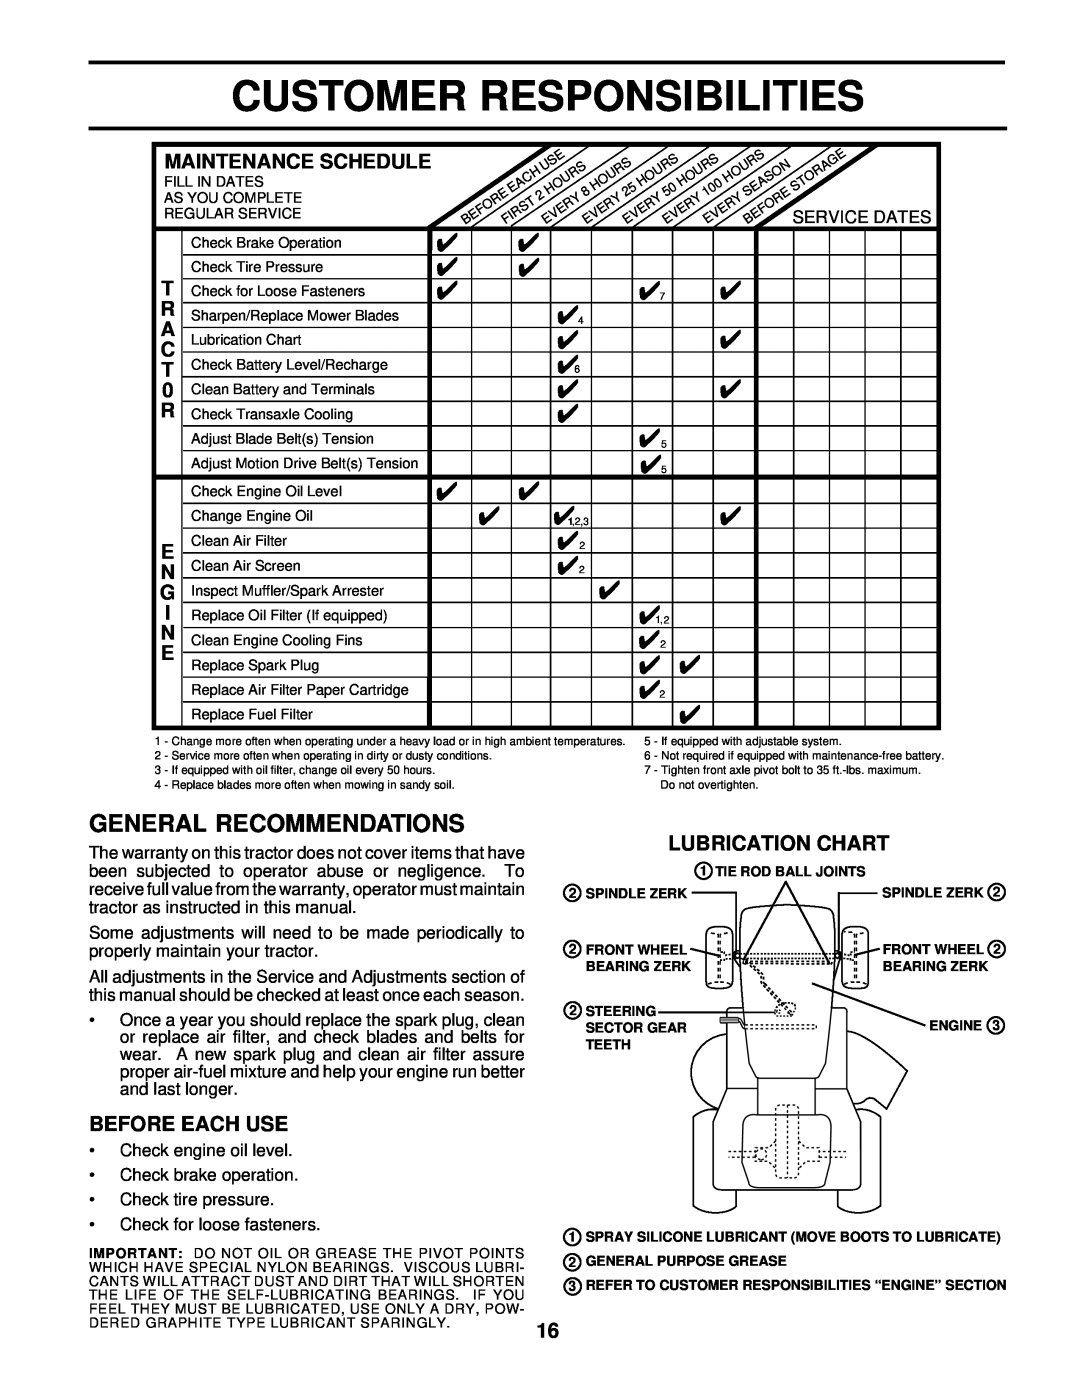 Husqvarna GTH220 owner manual Customer Responsibilities, General Recommendations, Lubrication Chart, Before Each Use 